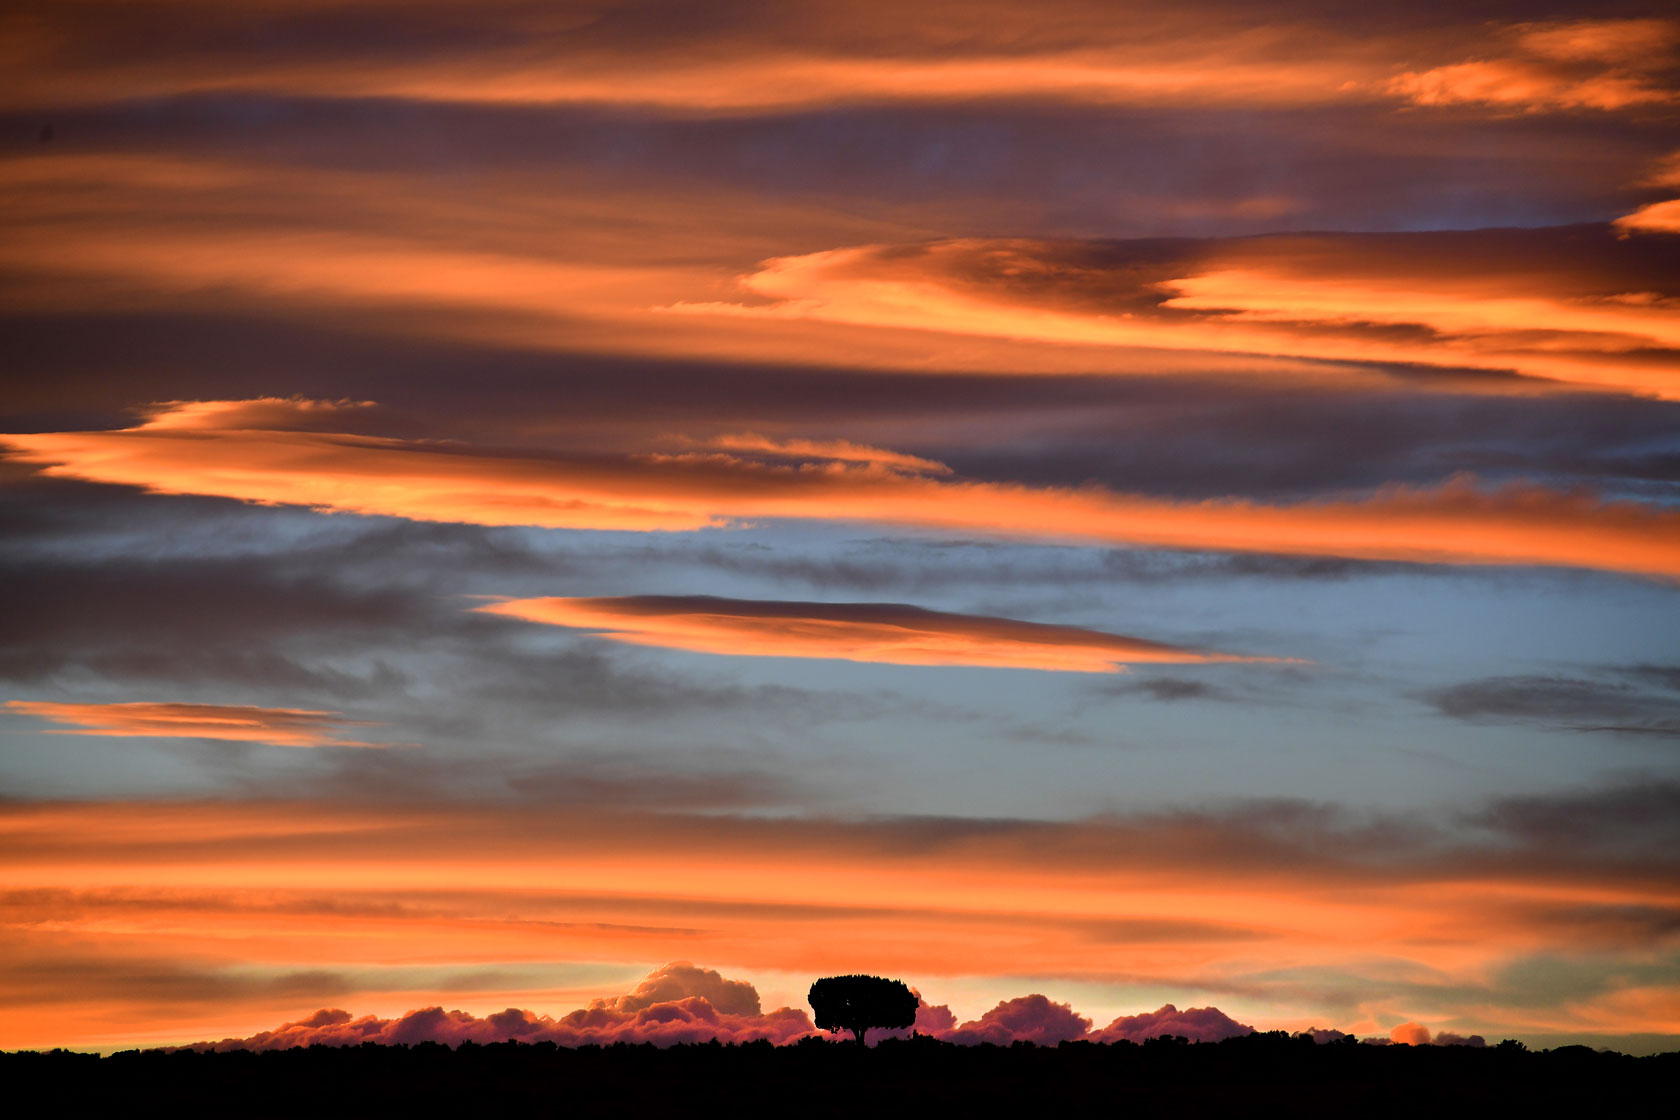 The sun sets over a lone tree in Bears Ears National Monument.